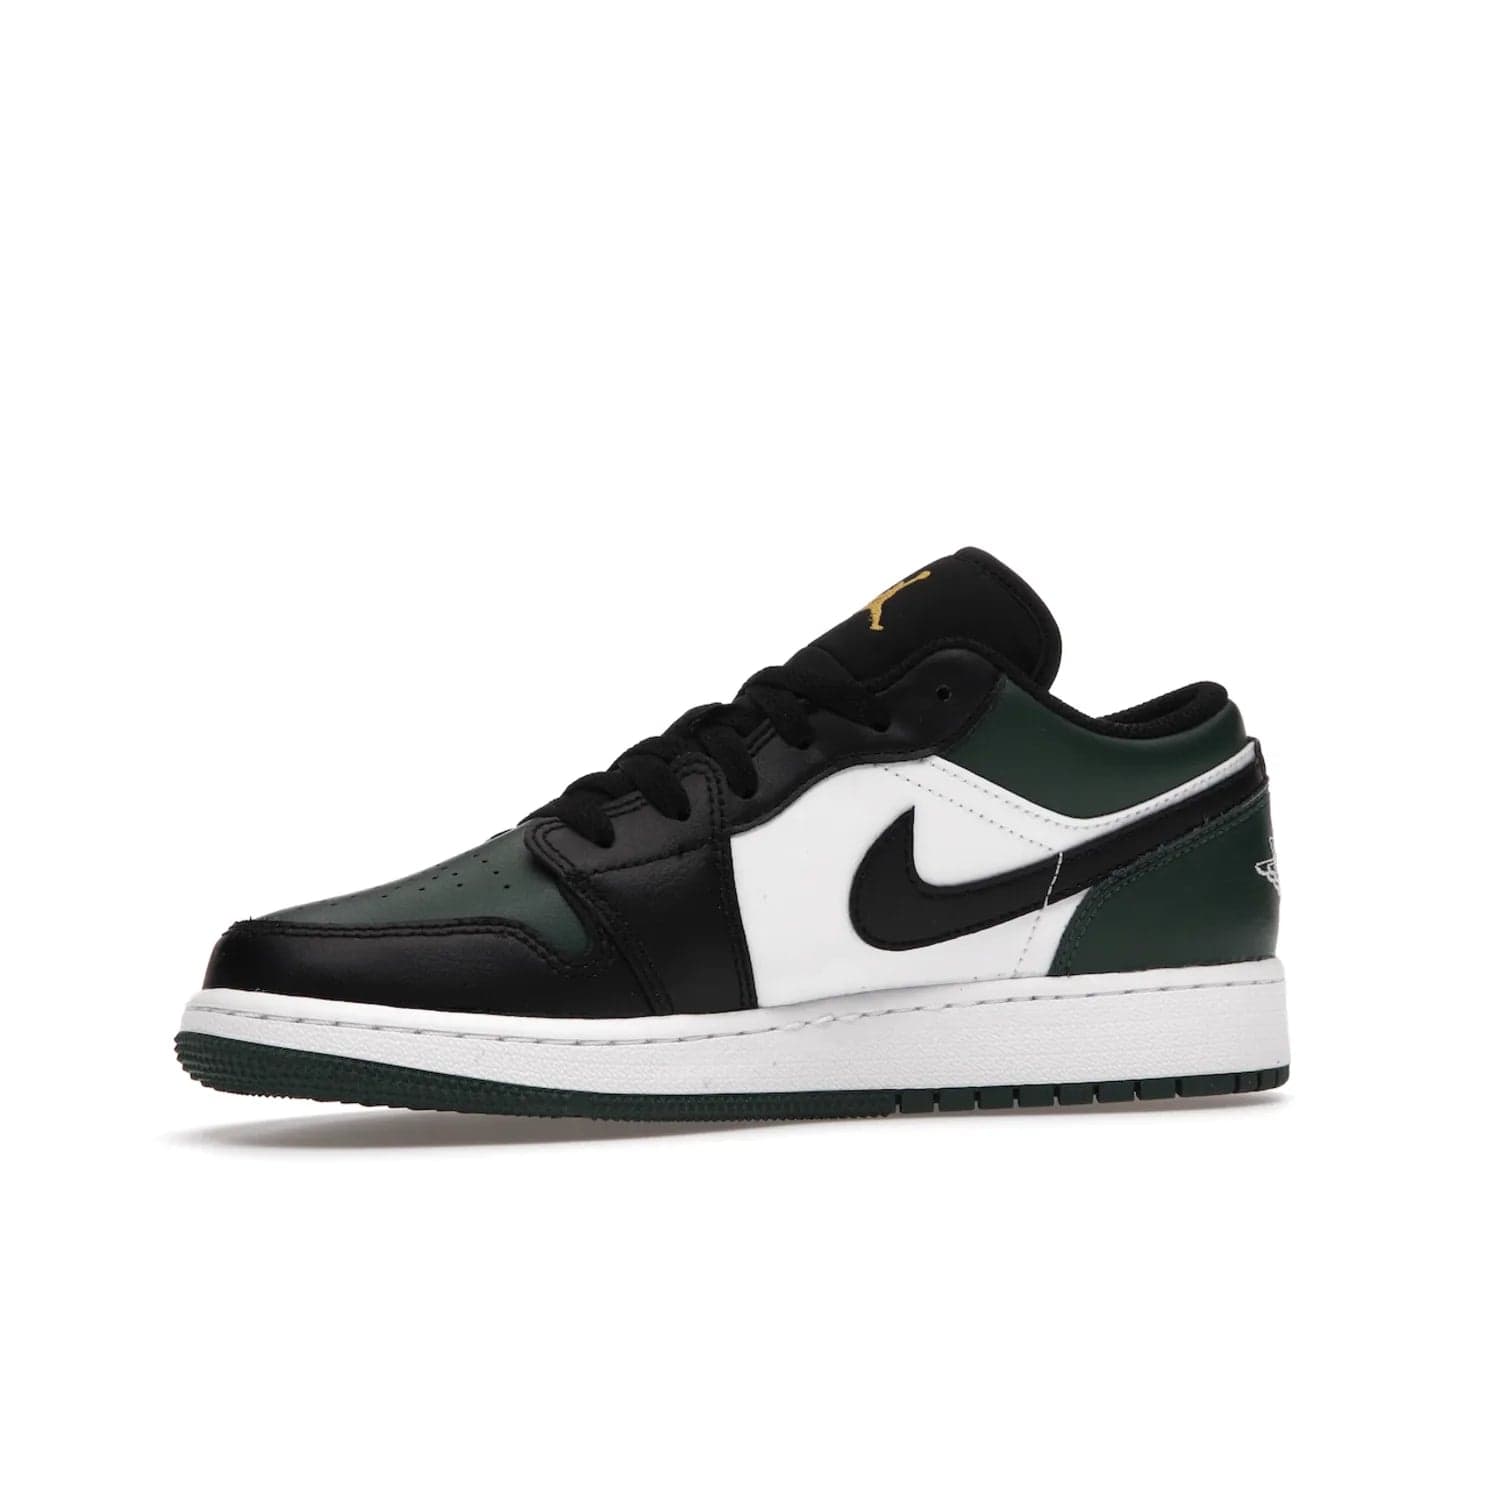 Jordan 1 Low Green Toe (GS) - Image 17 - Only at www.BallersClubKickz.com - Get the perfect low cut Jordans. Shop the Air Jordan 1 Low Noble Green GS shoes with its unique colorway and stencil Jumpman logo. Available October 2021.